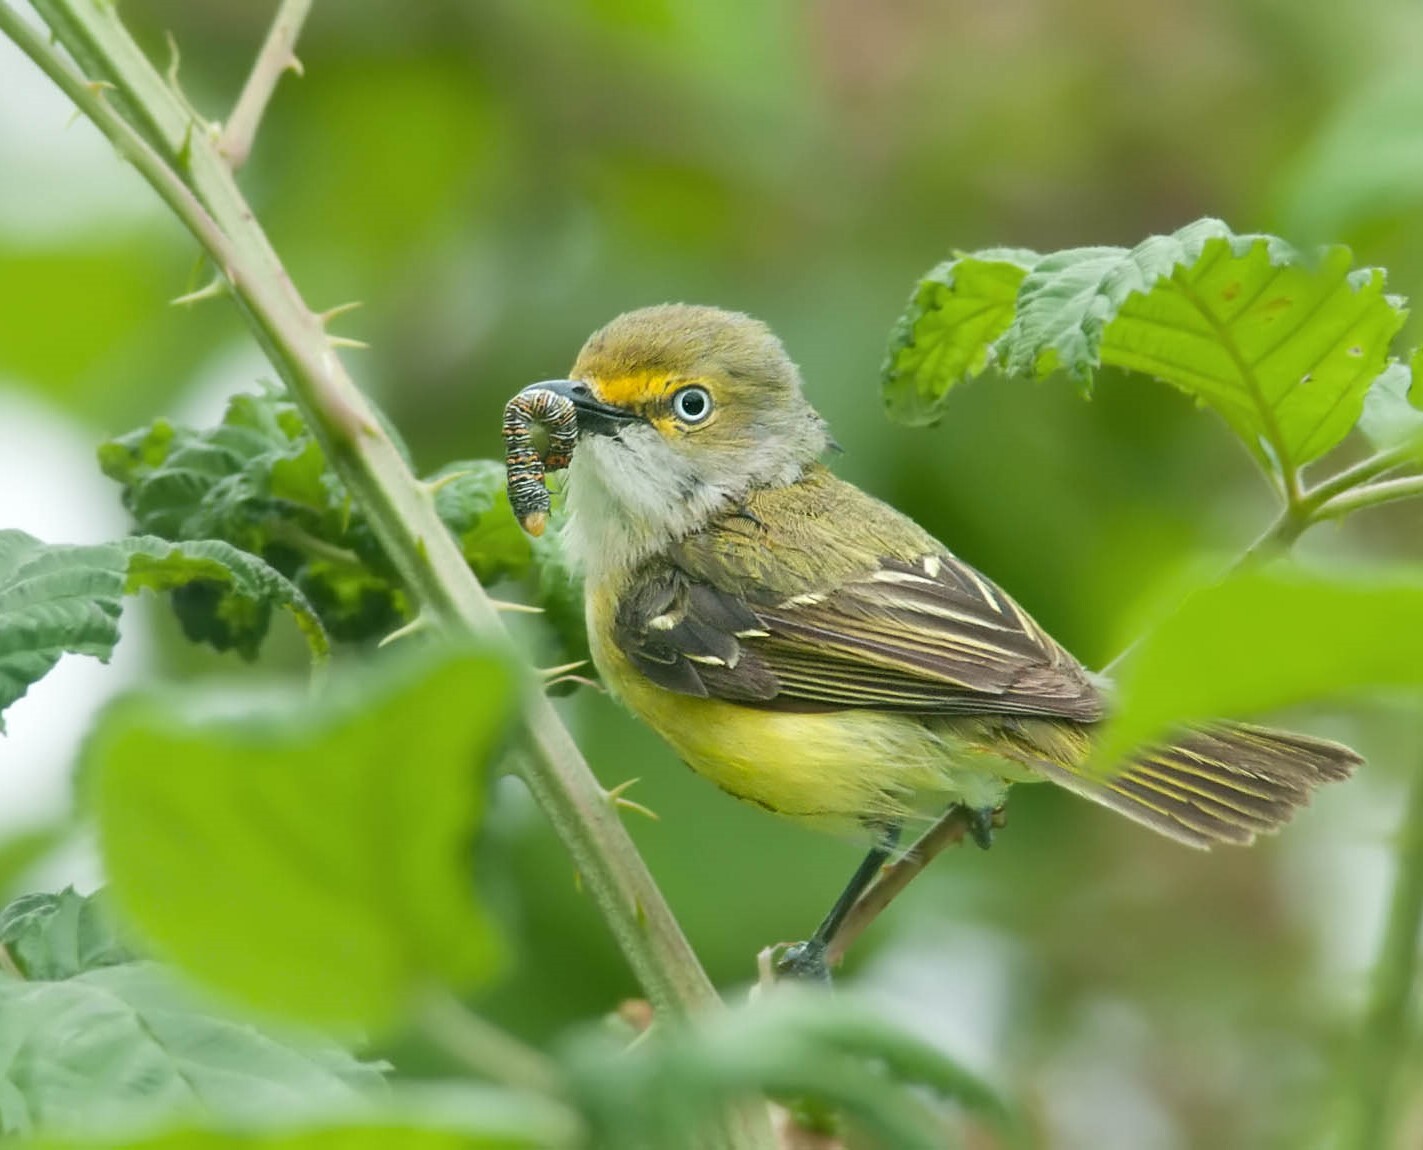 The secretive White-eyed Vireo has nested in Long Pond Park. <a href="https://www.flickr.com/photos/puttefin/4685291431" target="_blank">Photo</a>: Kelly Colgan Azar/<a href="https://creativecommons.org/licenses/by-nd/2.0/" target="_blank">CC BY-ND 2.0</a>